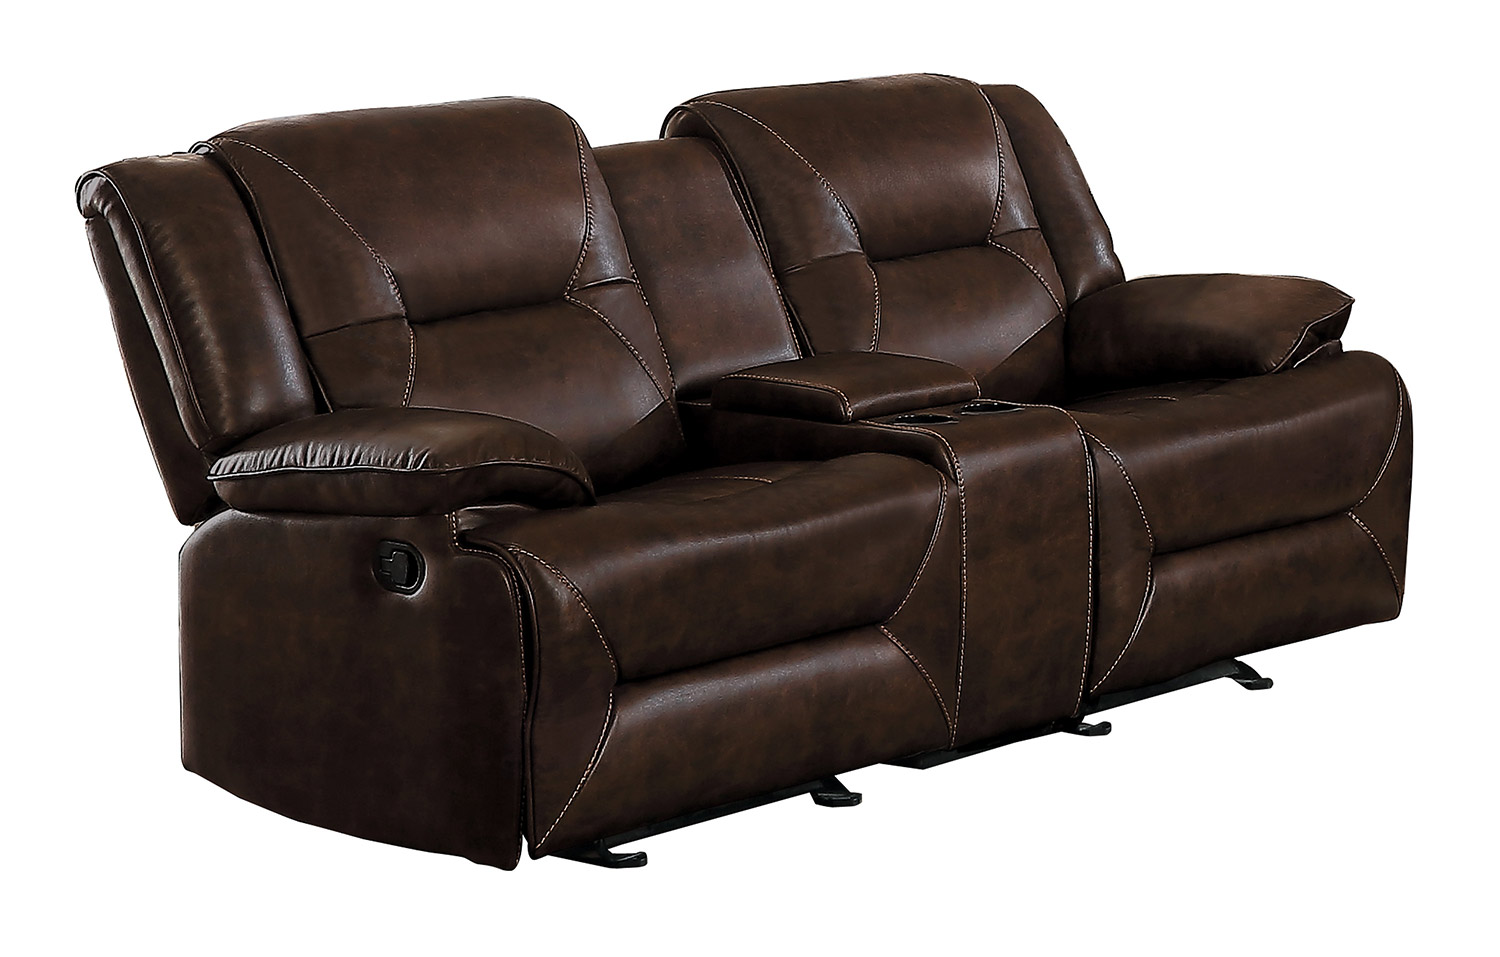 Homelegance Okello Double Glider Reclining Love Seat with Console - Brown AireHyde Match